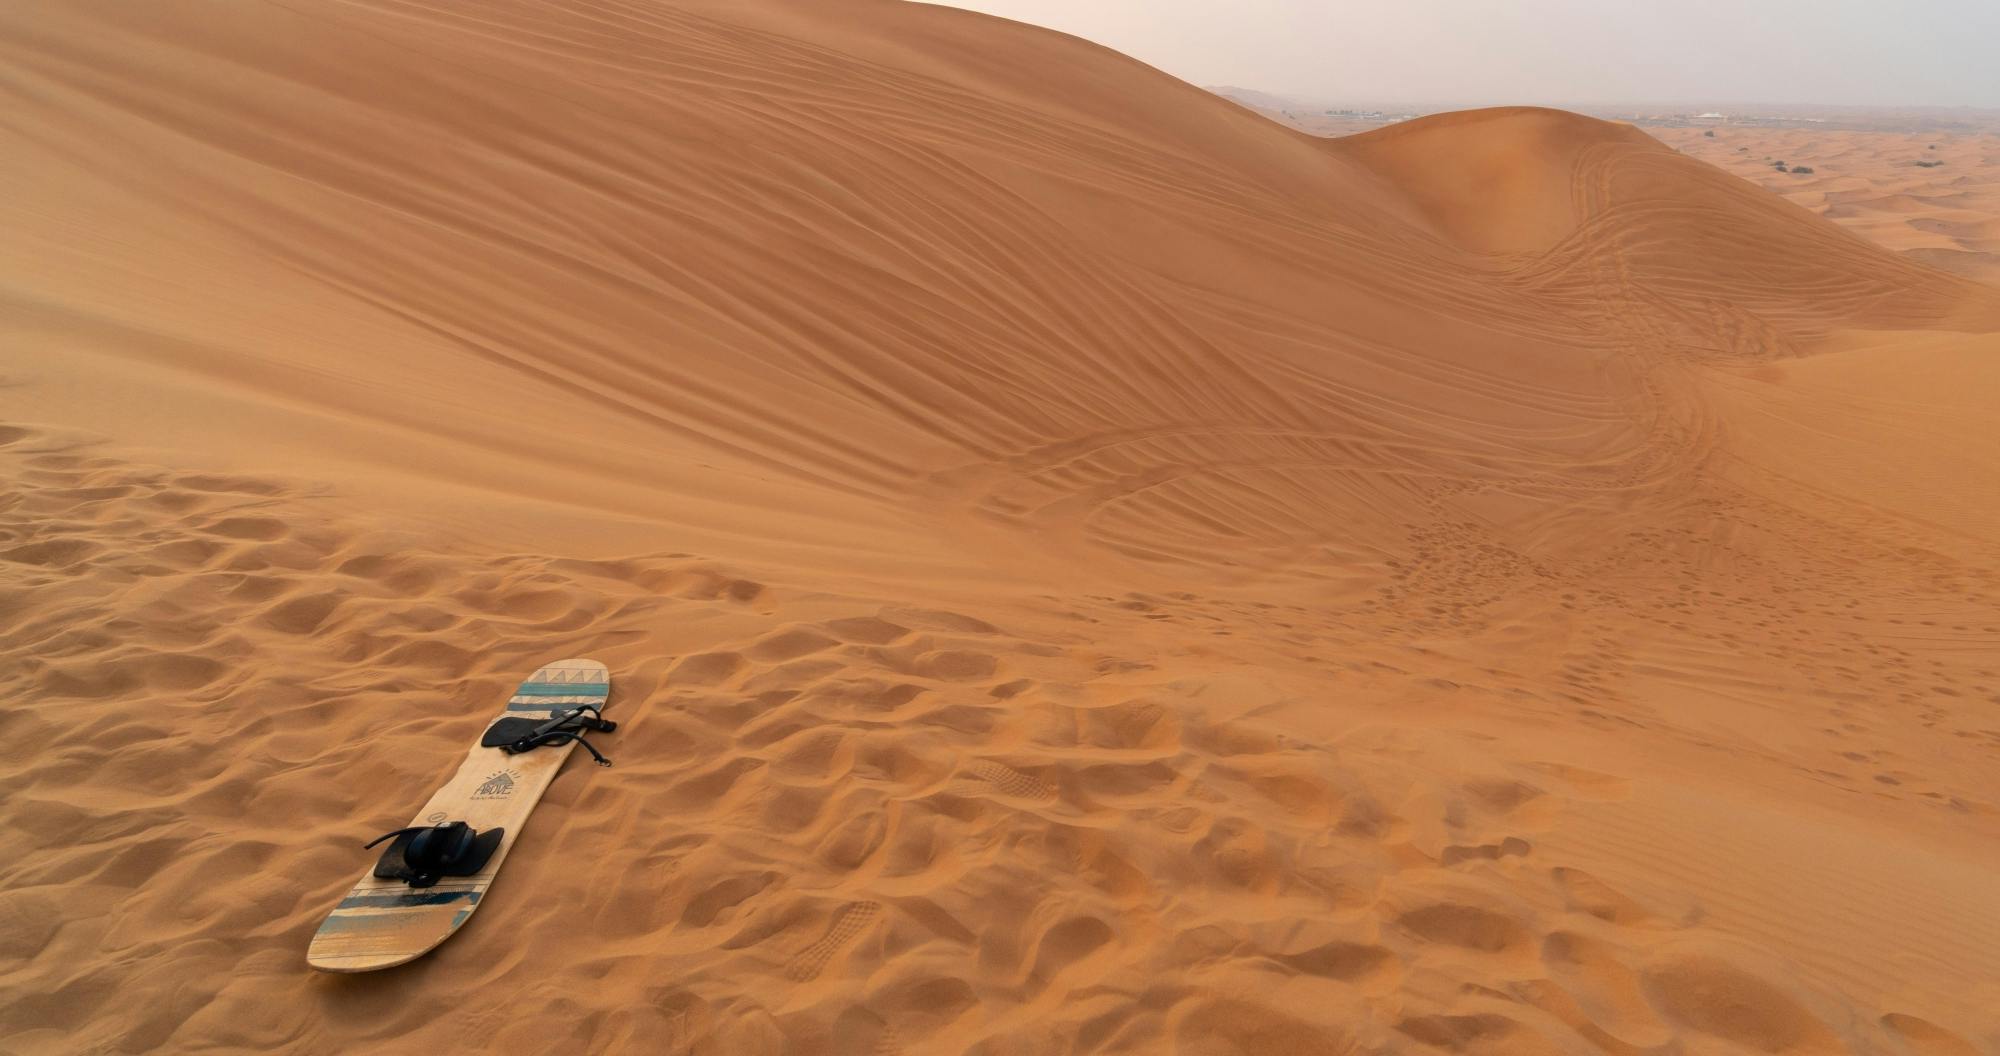 Sandboarding and secret paradise valley full day tour from Agadir Musement